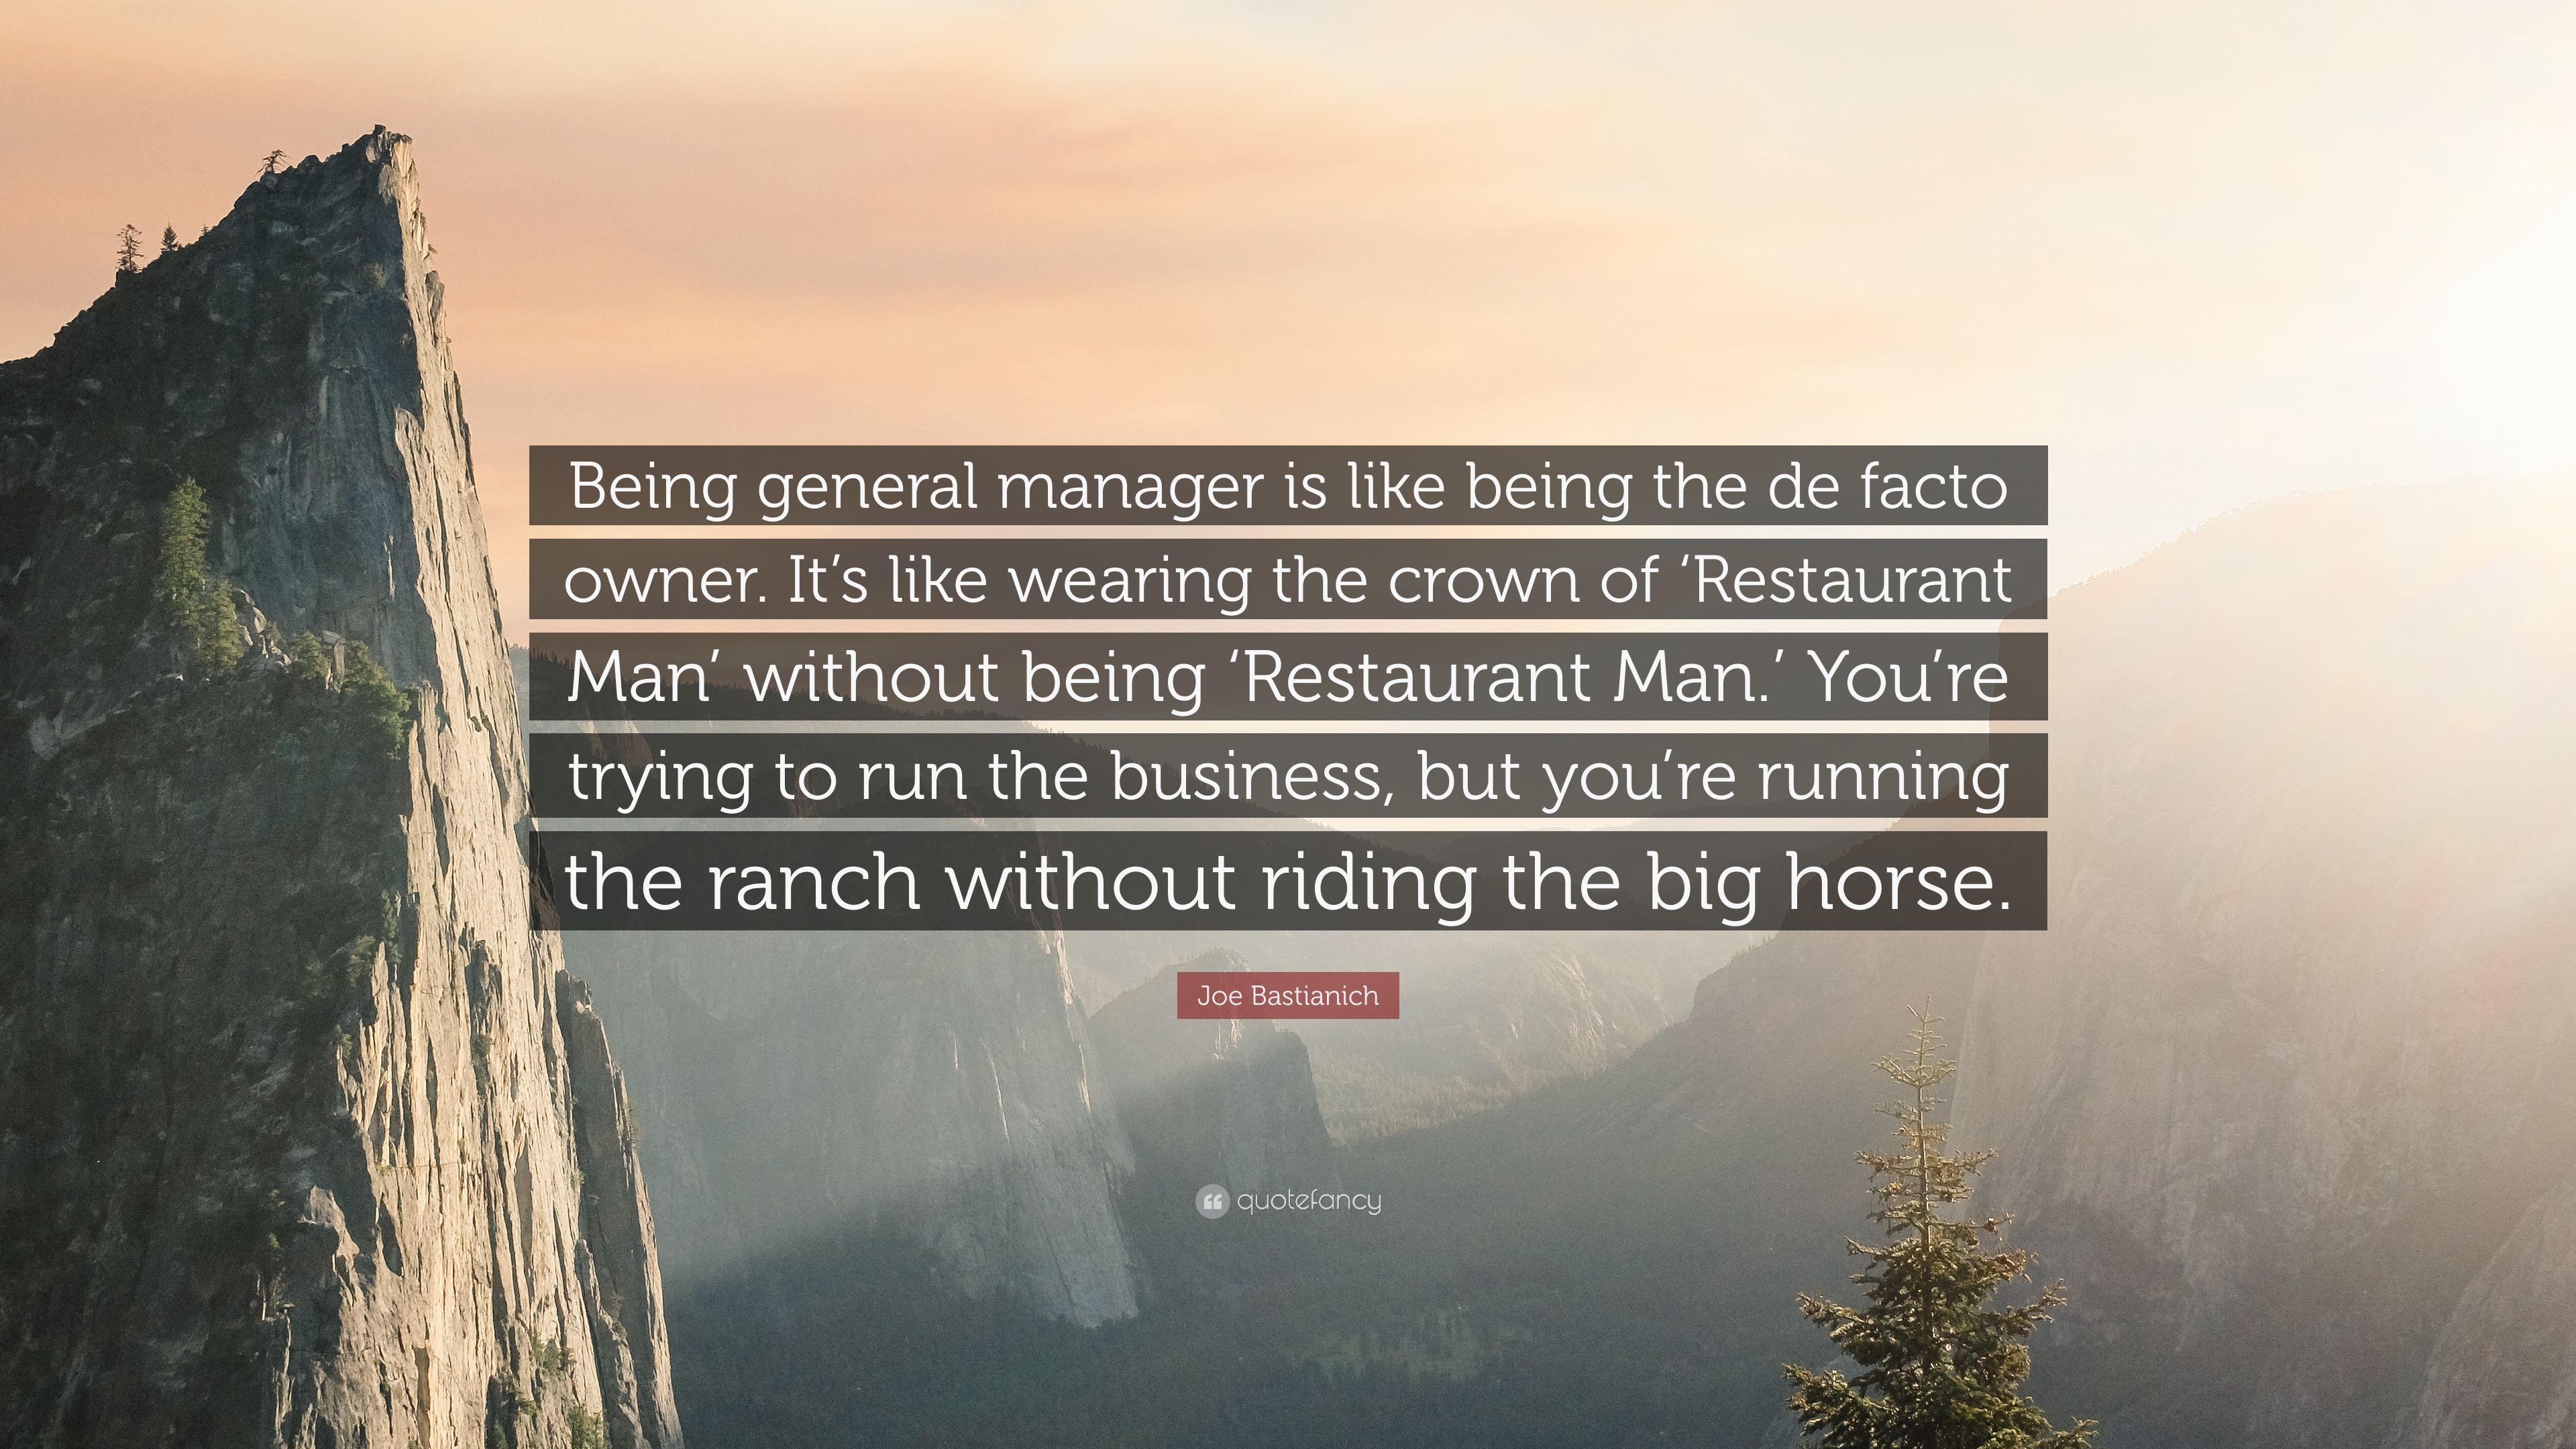 Joe Bastianich Quote: “Being general manager is like being the de